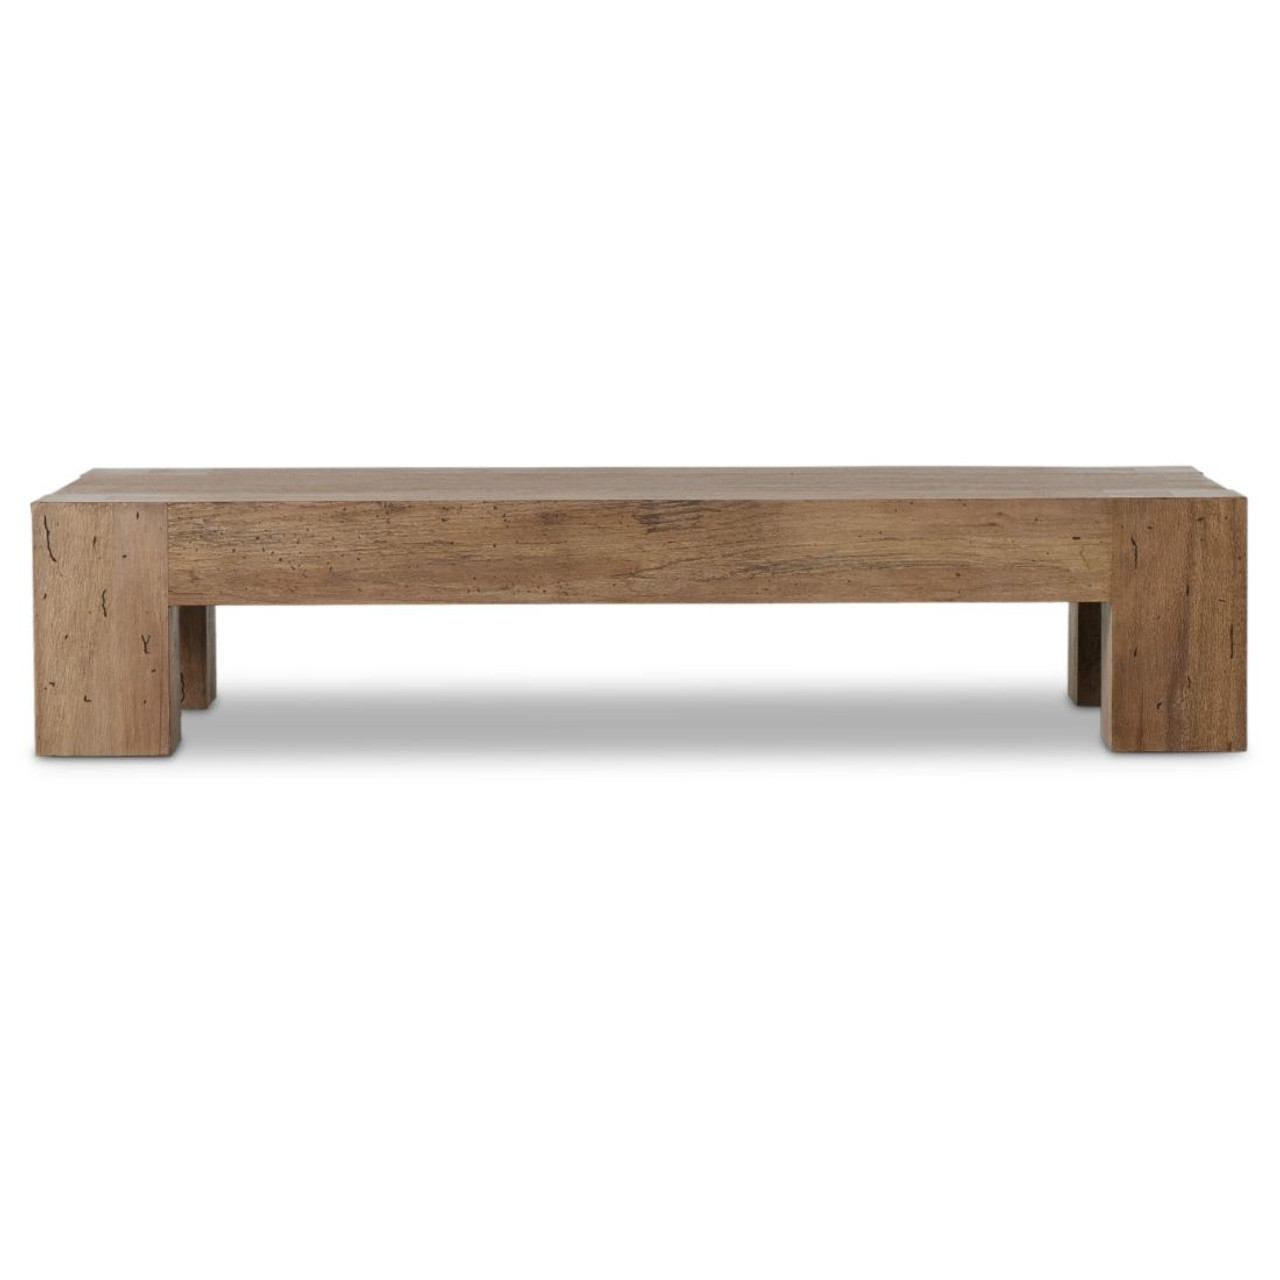 Rectangular Small Table Made of Wood Emone